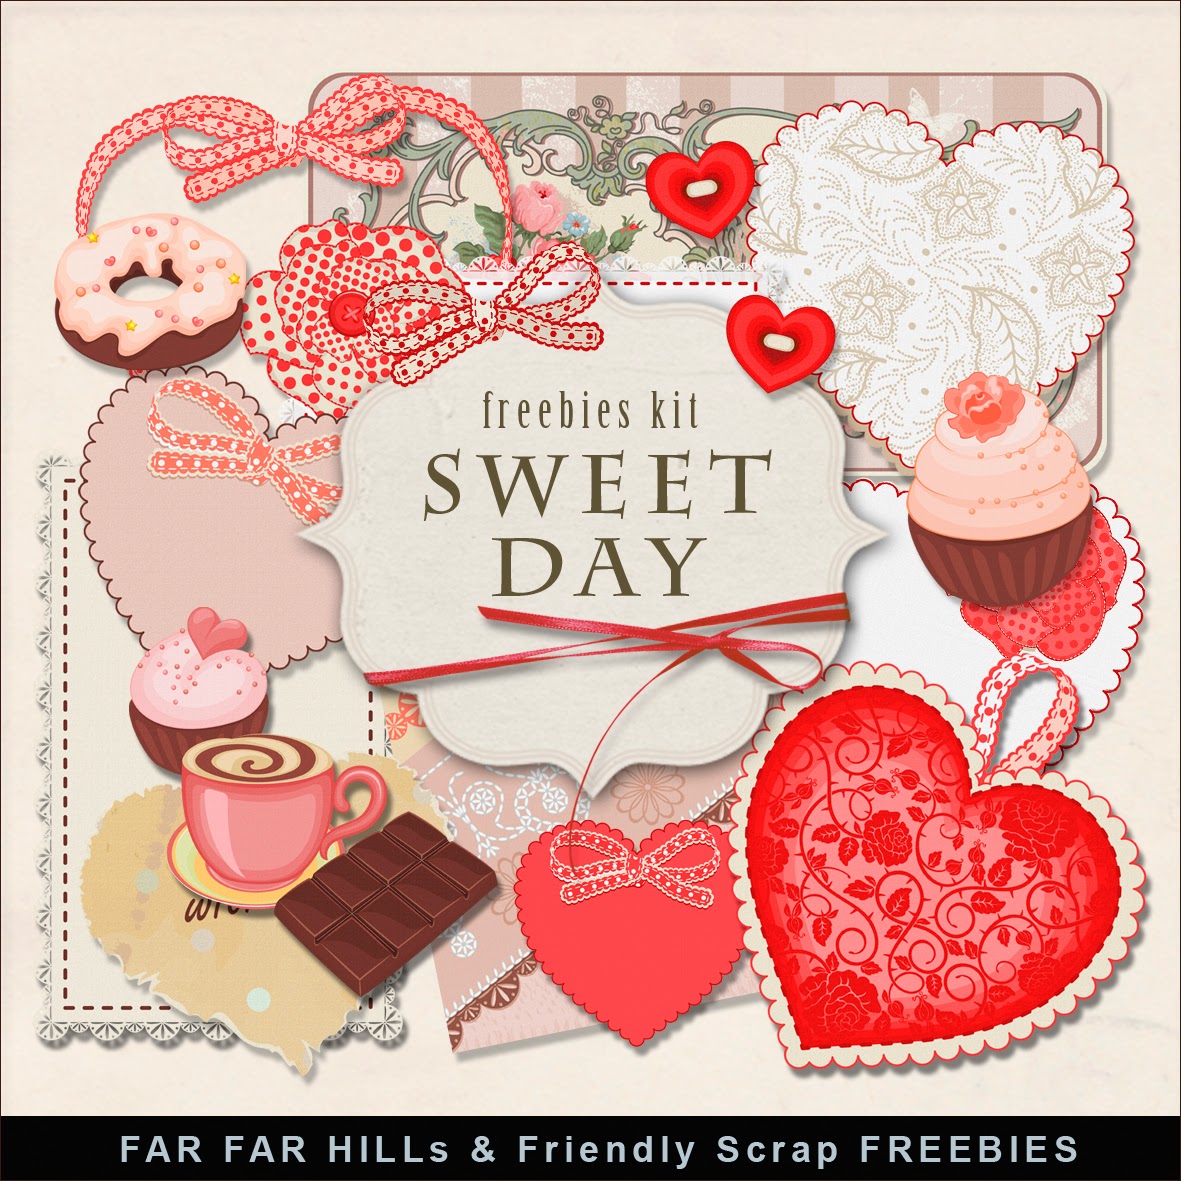 Far far hill. Sweet Day. Sweet Day картинки. Sweetest Day in USA. Аватарки Sweet Day.